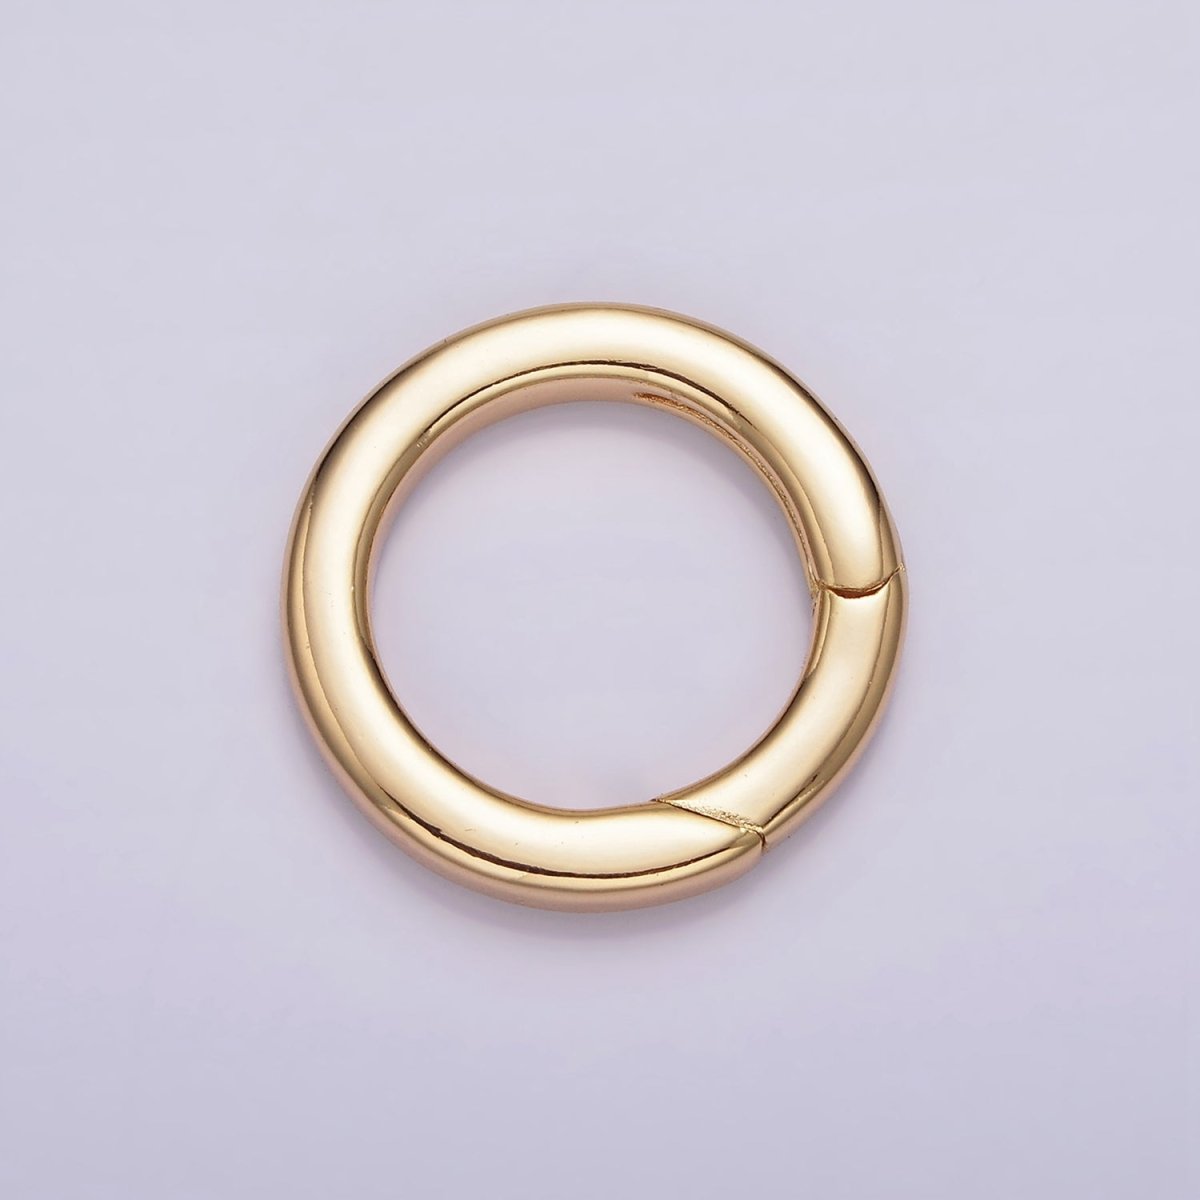 18K Gold Filled Push Gate Ring Charm Holder Bail for Charm Jewelry Kit Supplies For DIY Jewelry Making | Z-492 - Z-497 - DLUXCA